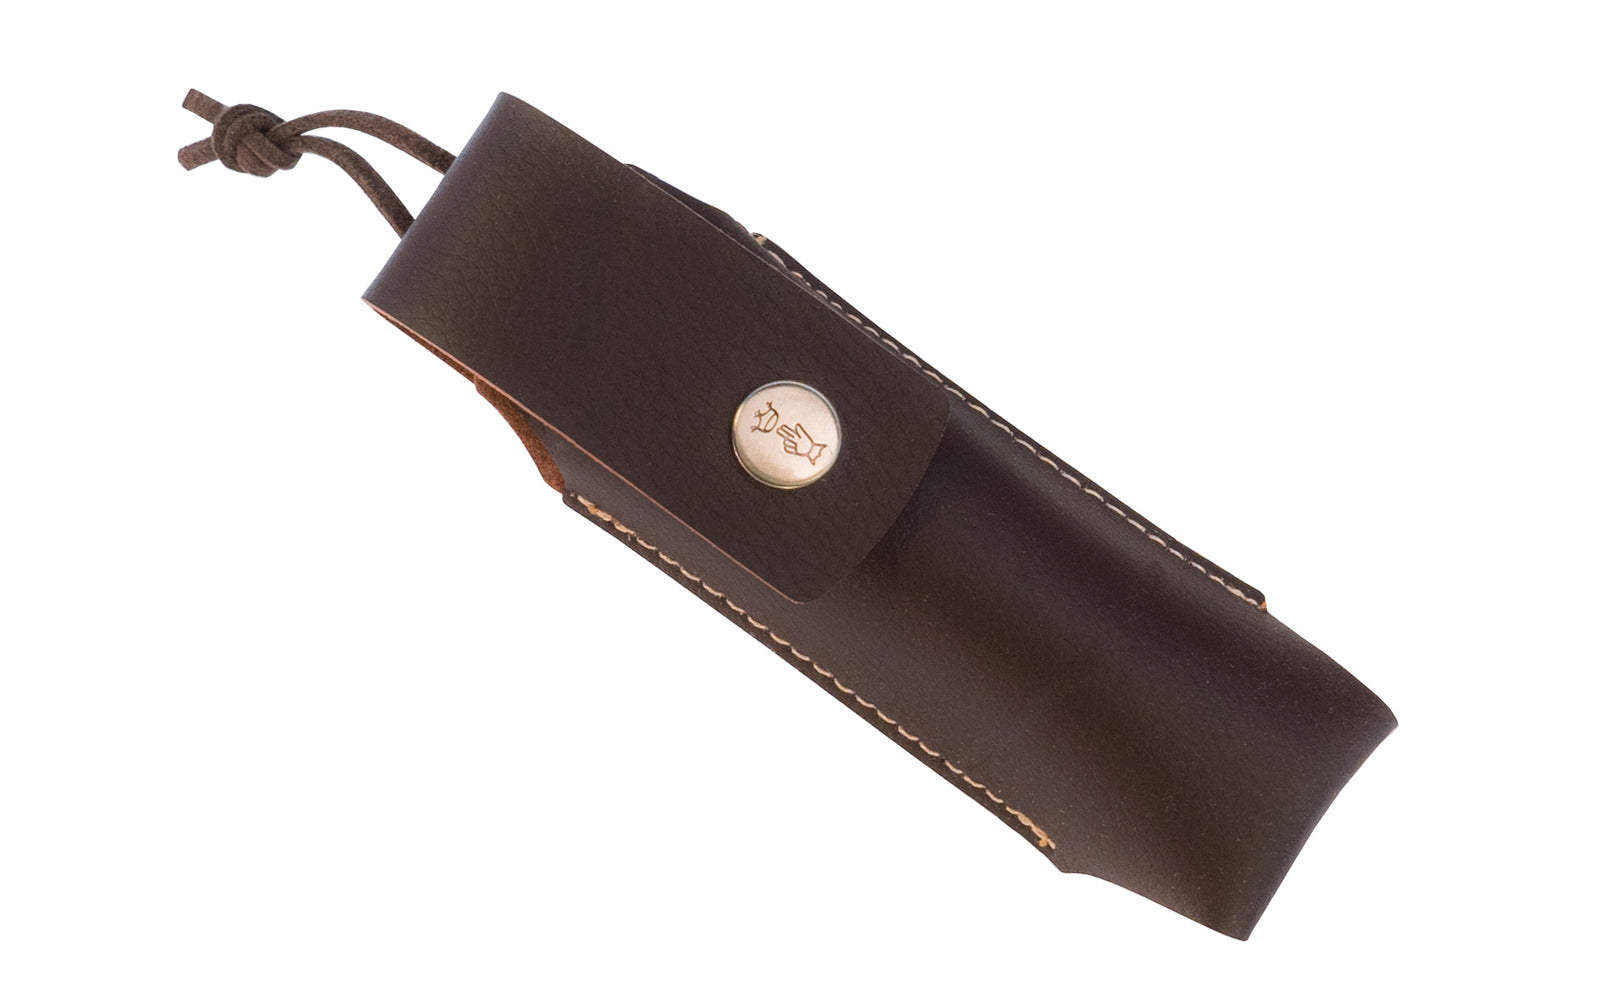 Made of brown synthetic leather, this Opinel Alpine Knife Sheath a nice durable sheath to help protect your knives. Will fit the traditional No. 7 & No. 8  knives, as well as the Slim No. 8 & No.10  knives. Sheath can be closed with the button snap attached & on the back is a vertical belt loop & leather lanyard